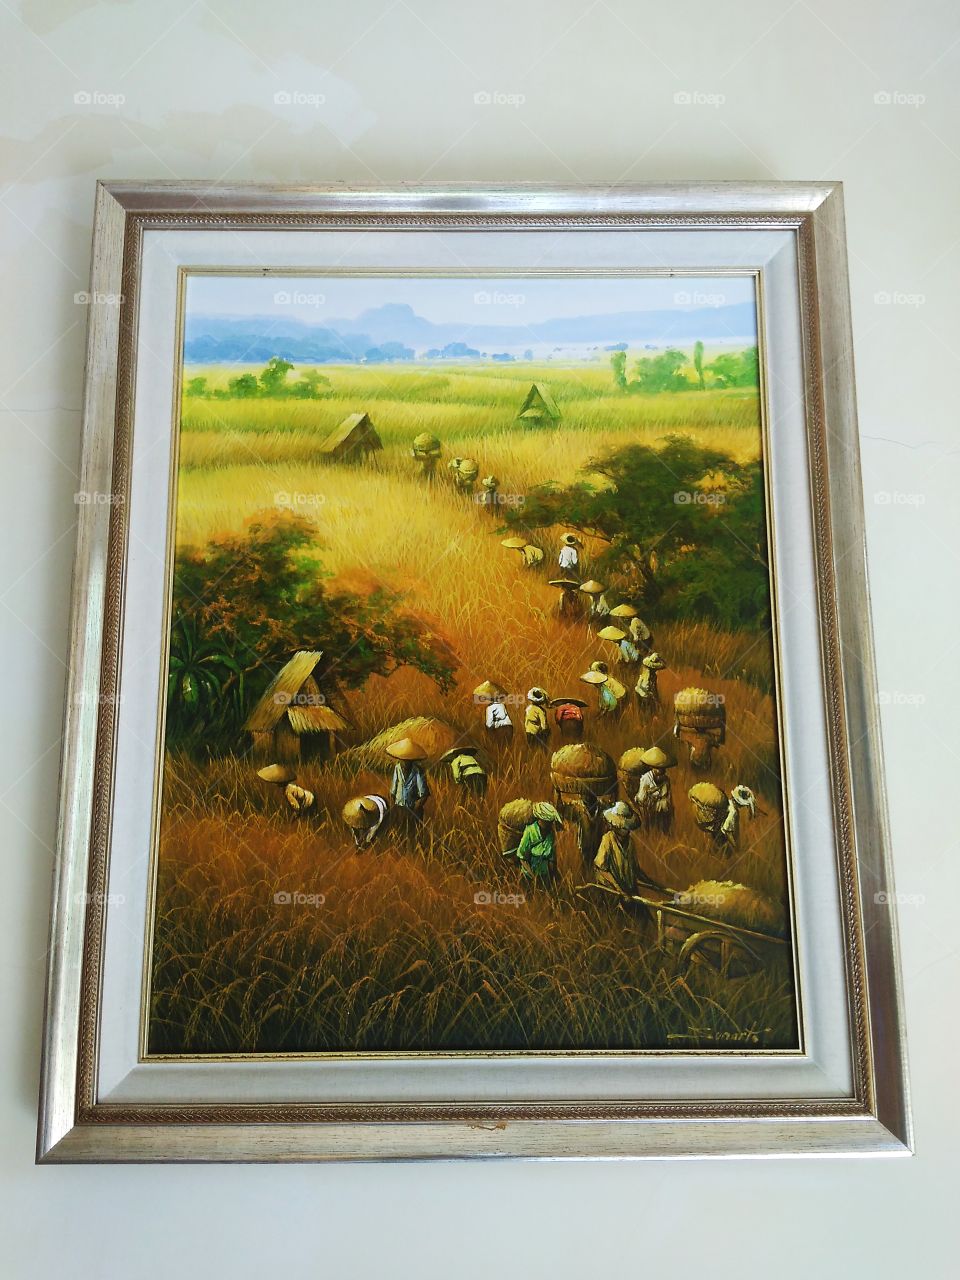 Painting rural rice fields